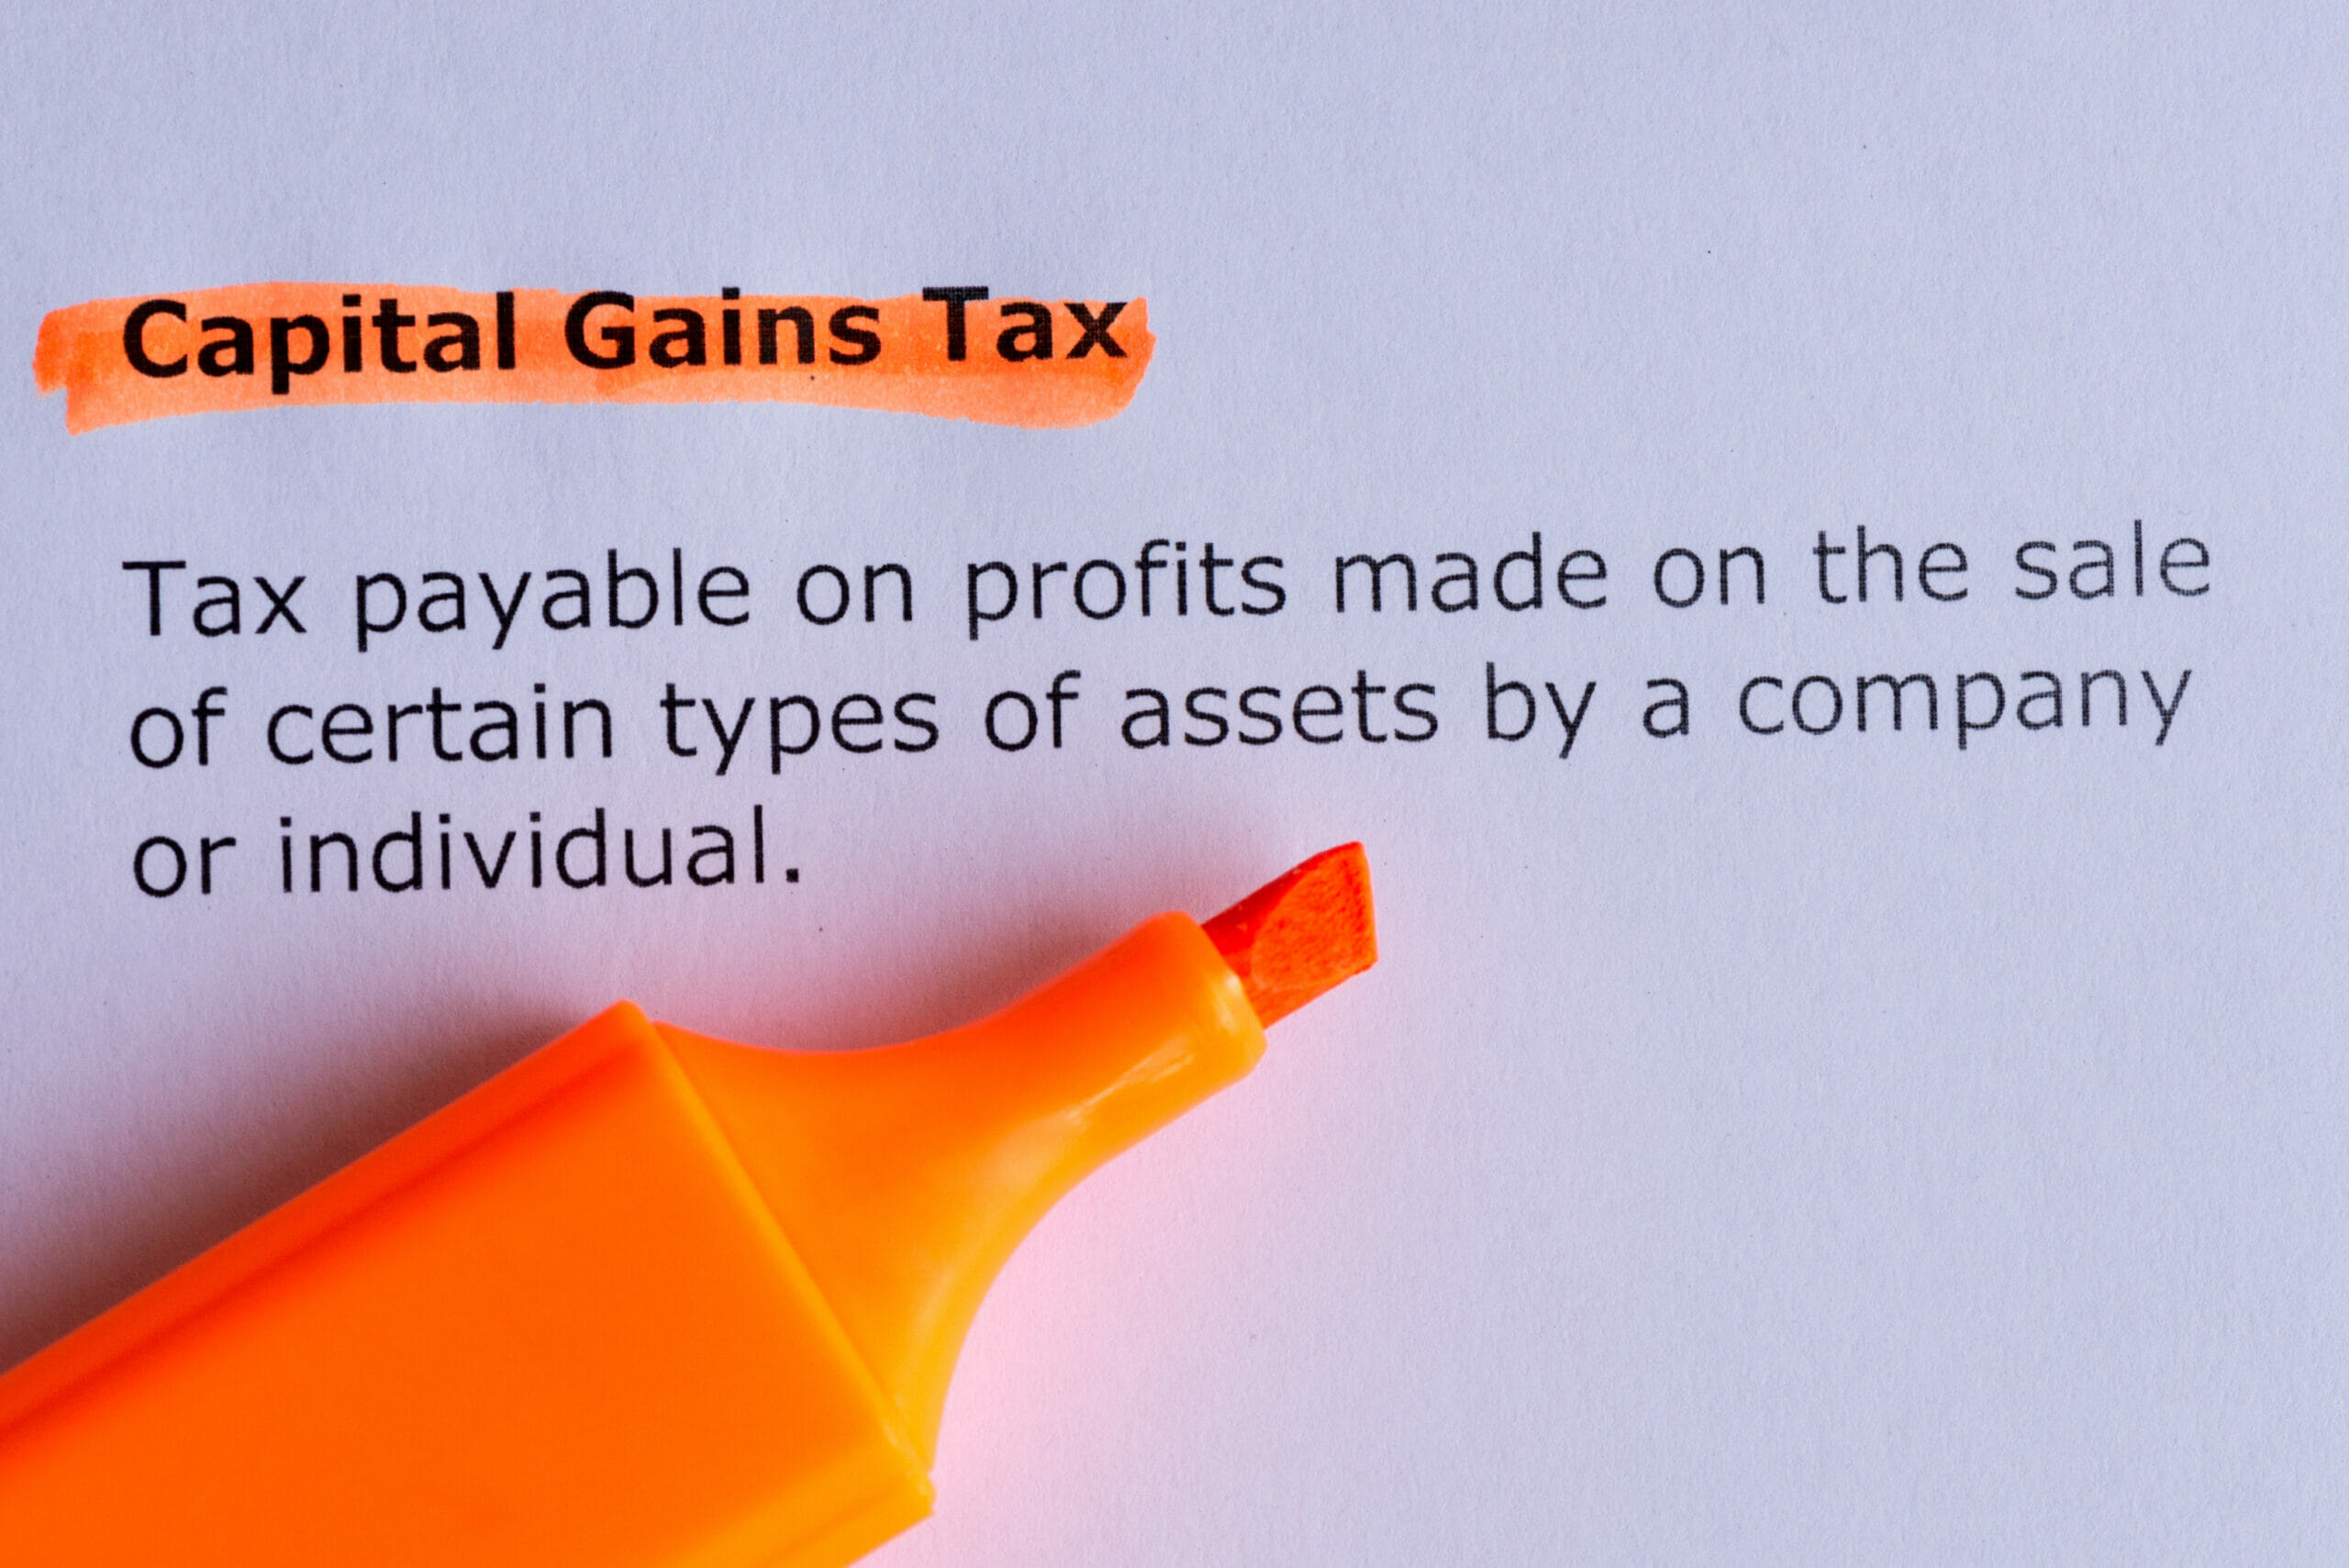 Preparing for Capital Gains Tax Increases in 2021